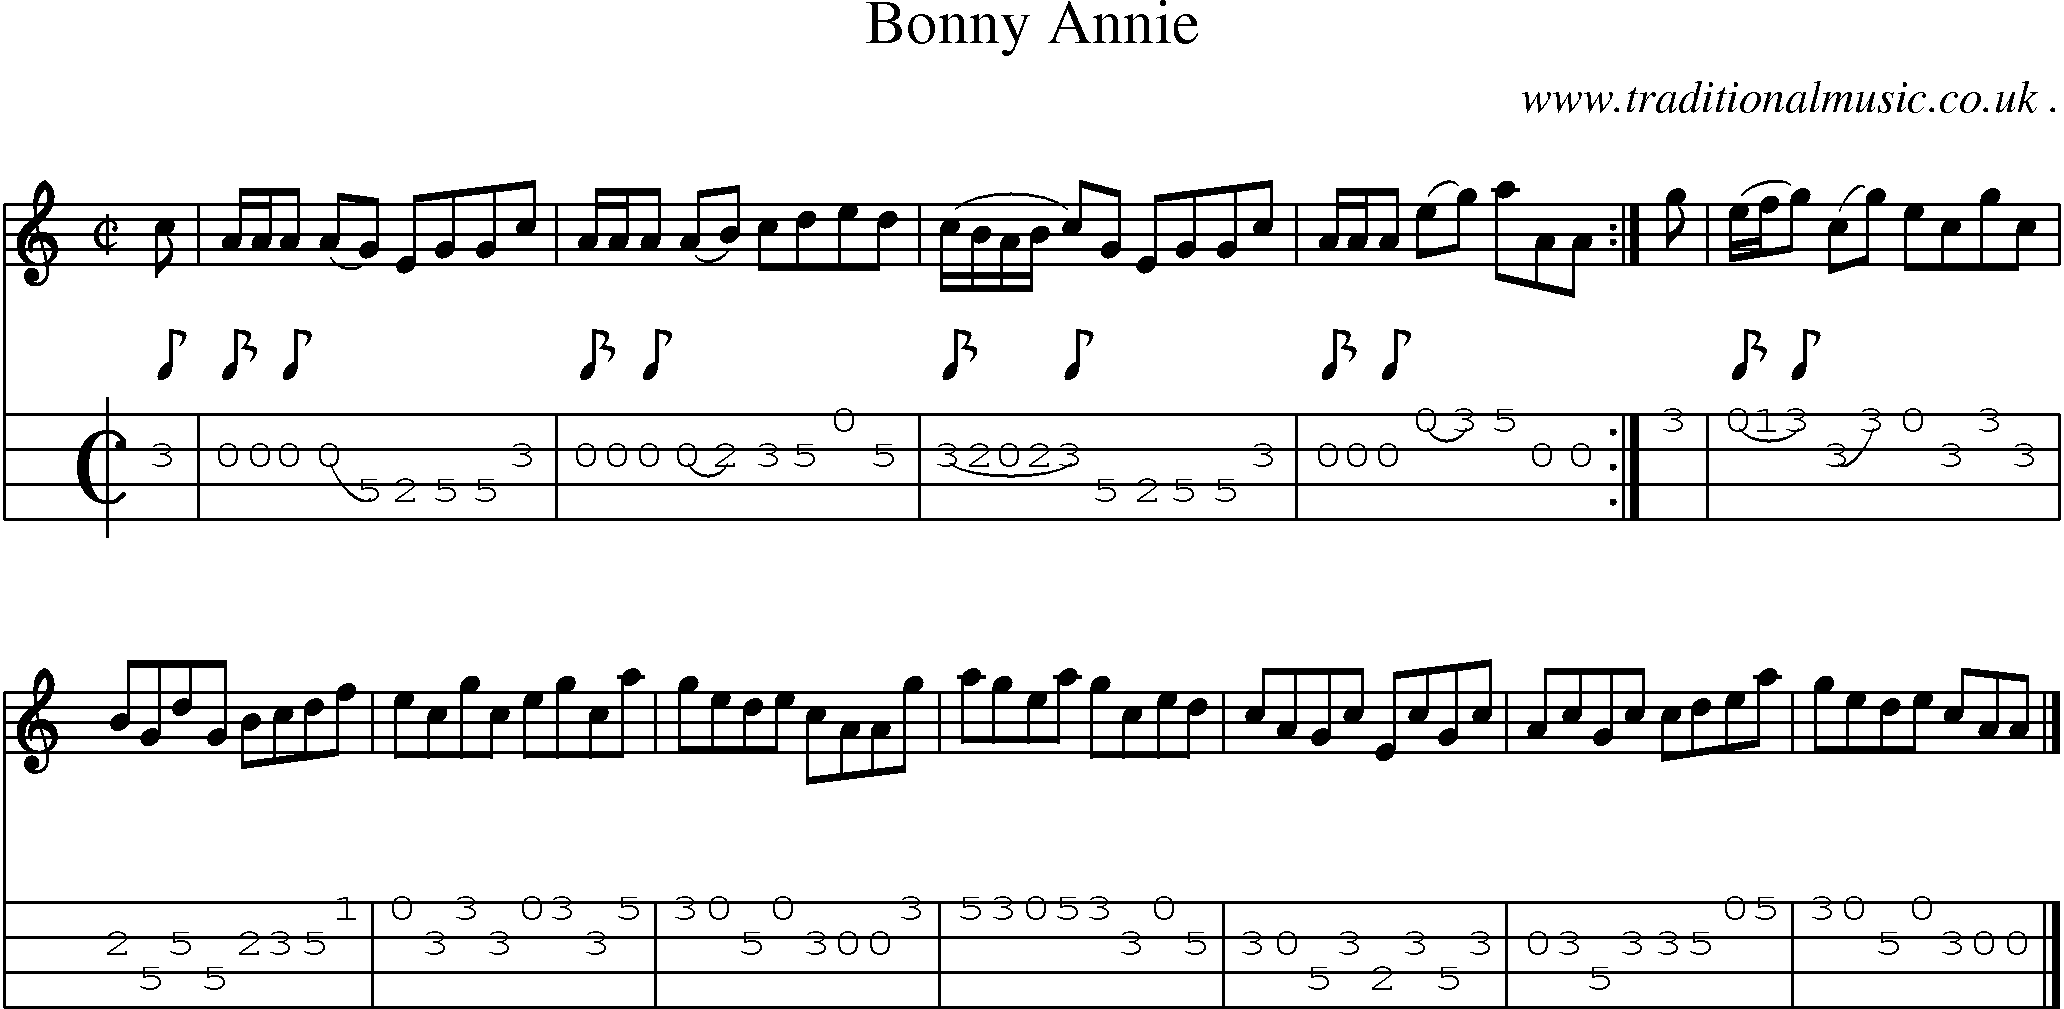 Sheet-music  score, Chords and Mandolin Tabs for Bonny Annie